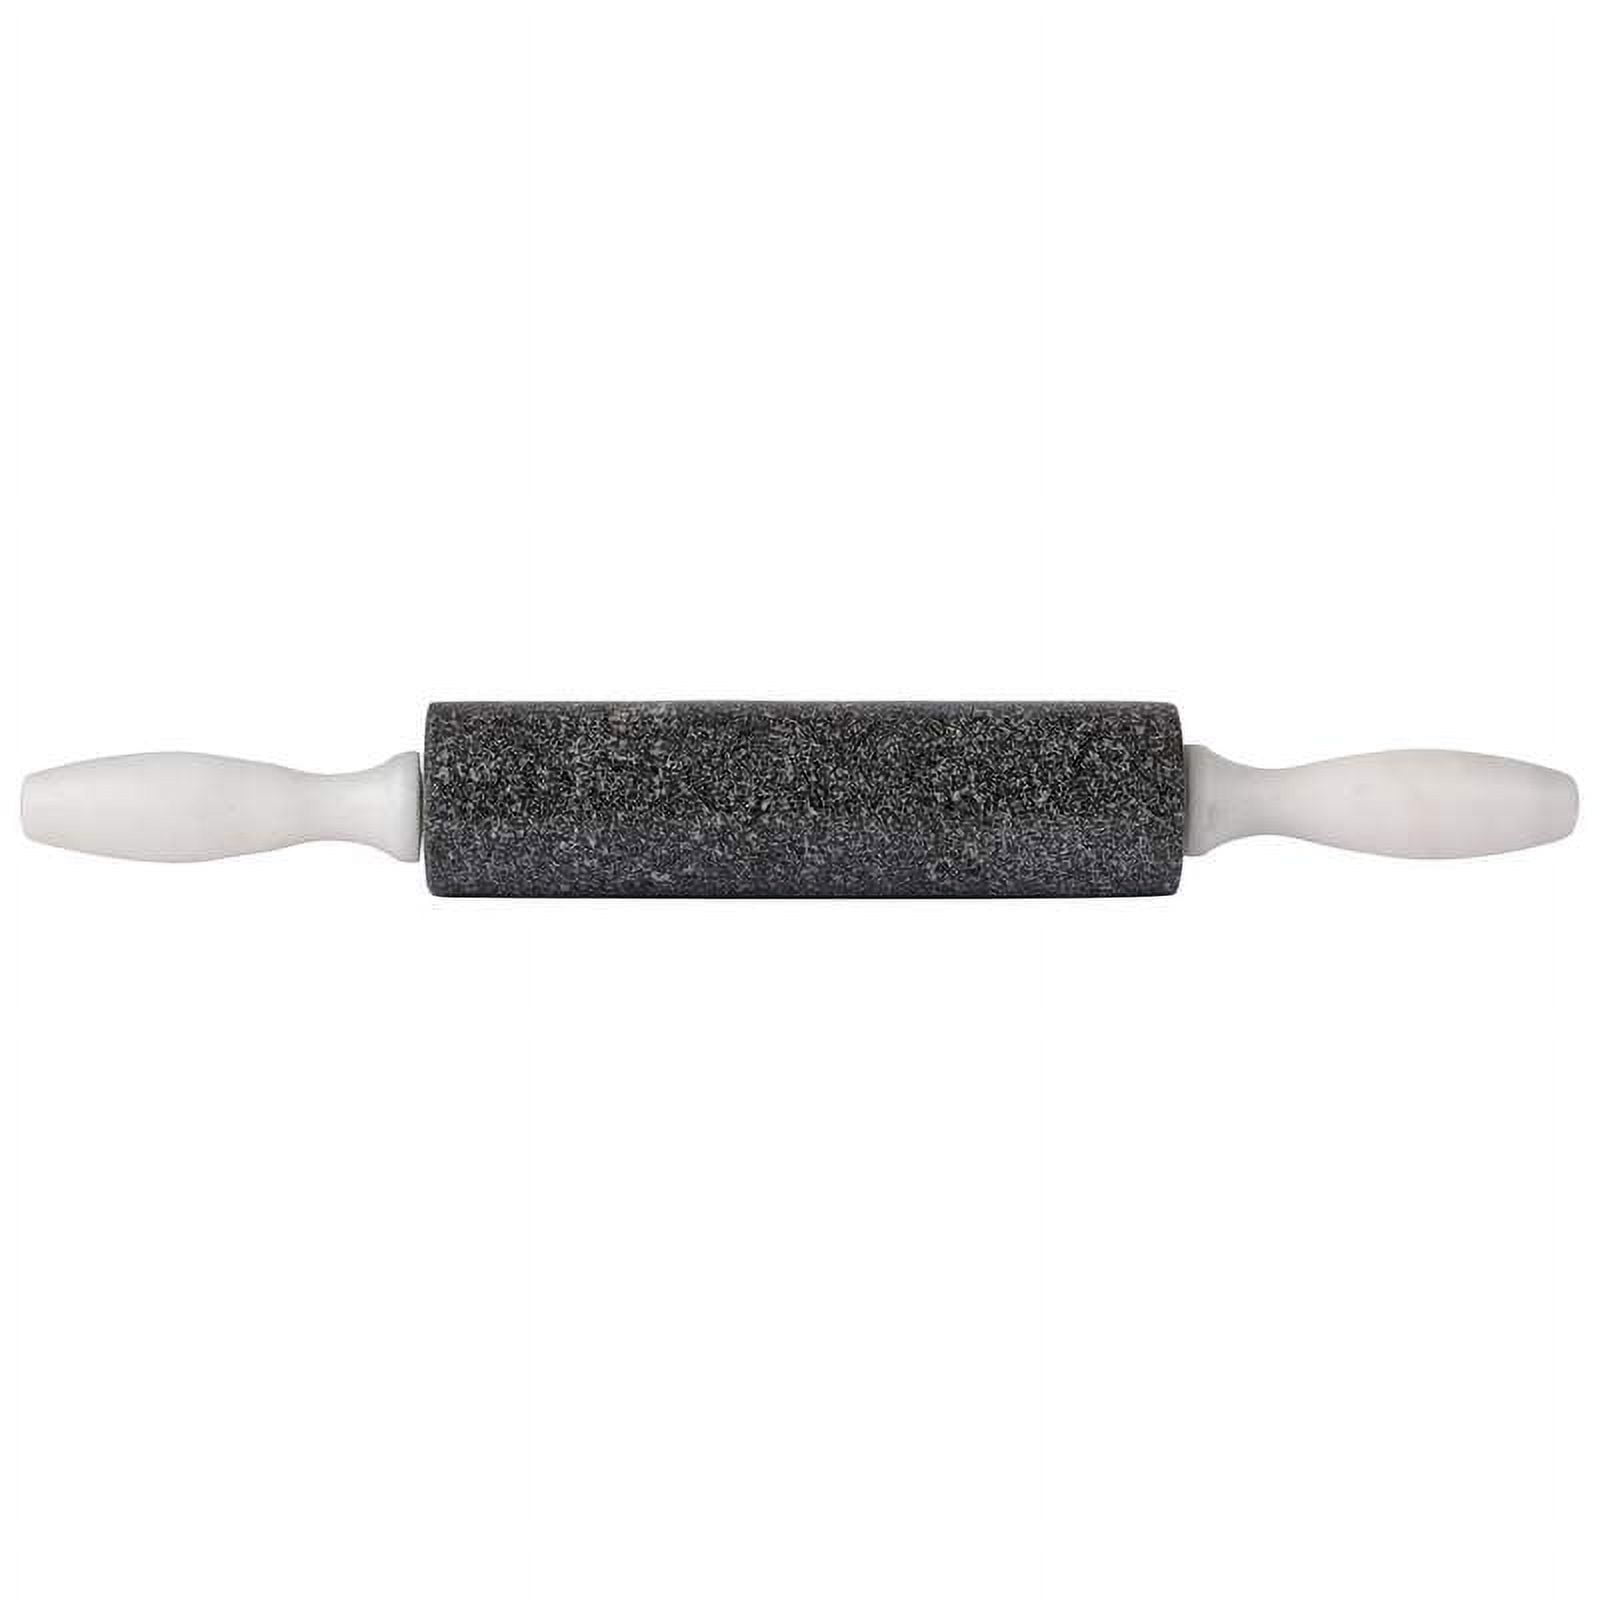 Ktgrp 16 In. Charcoal Colored Granite Rolling Pin